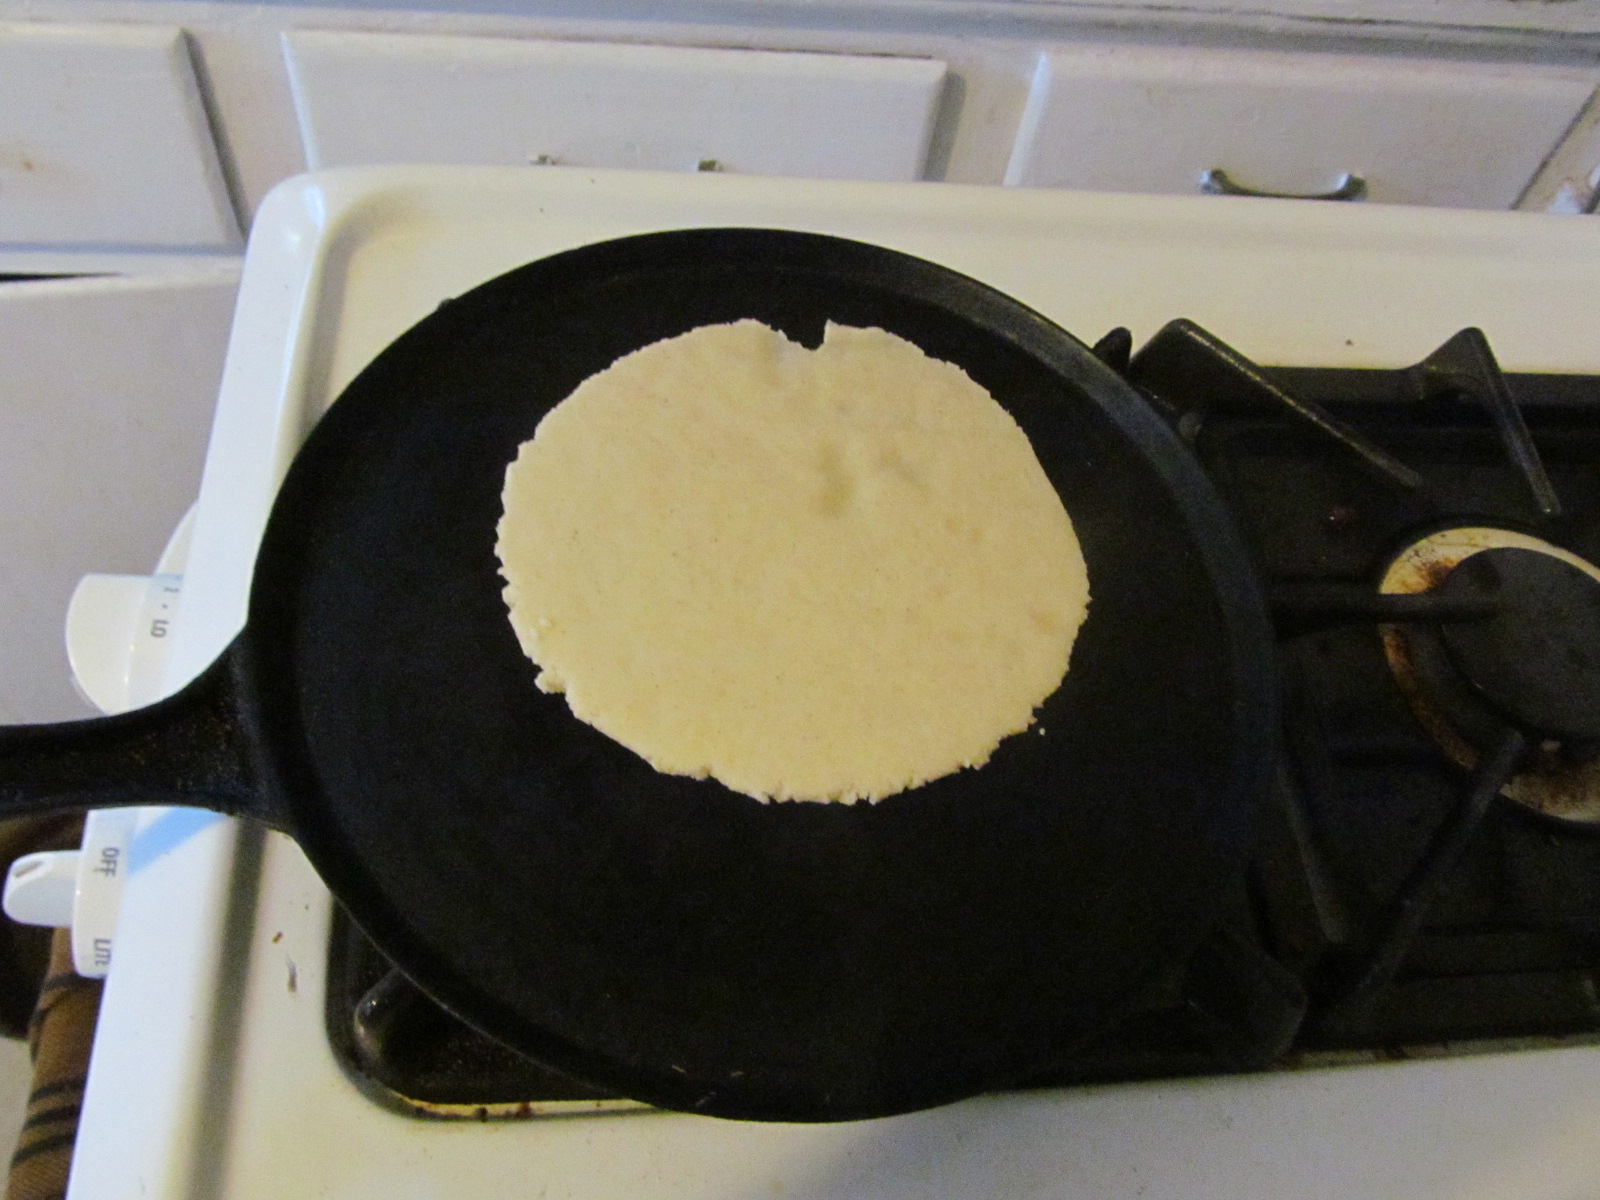 Tortilla grilling on a comal